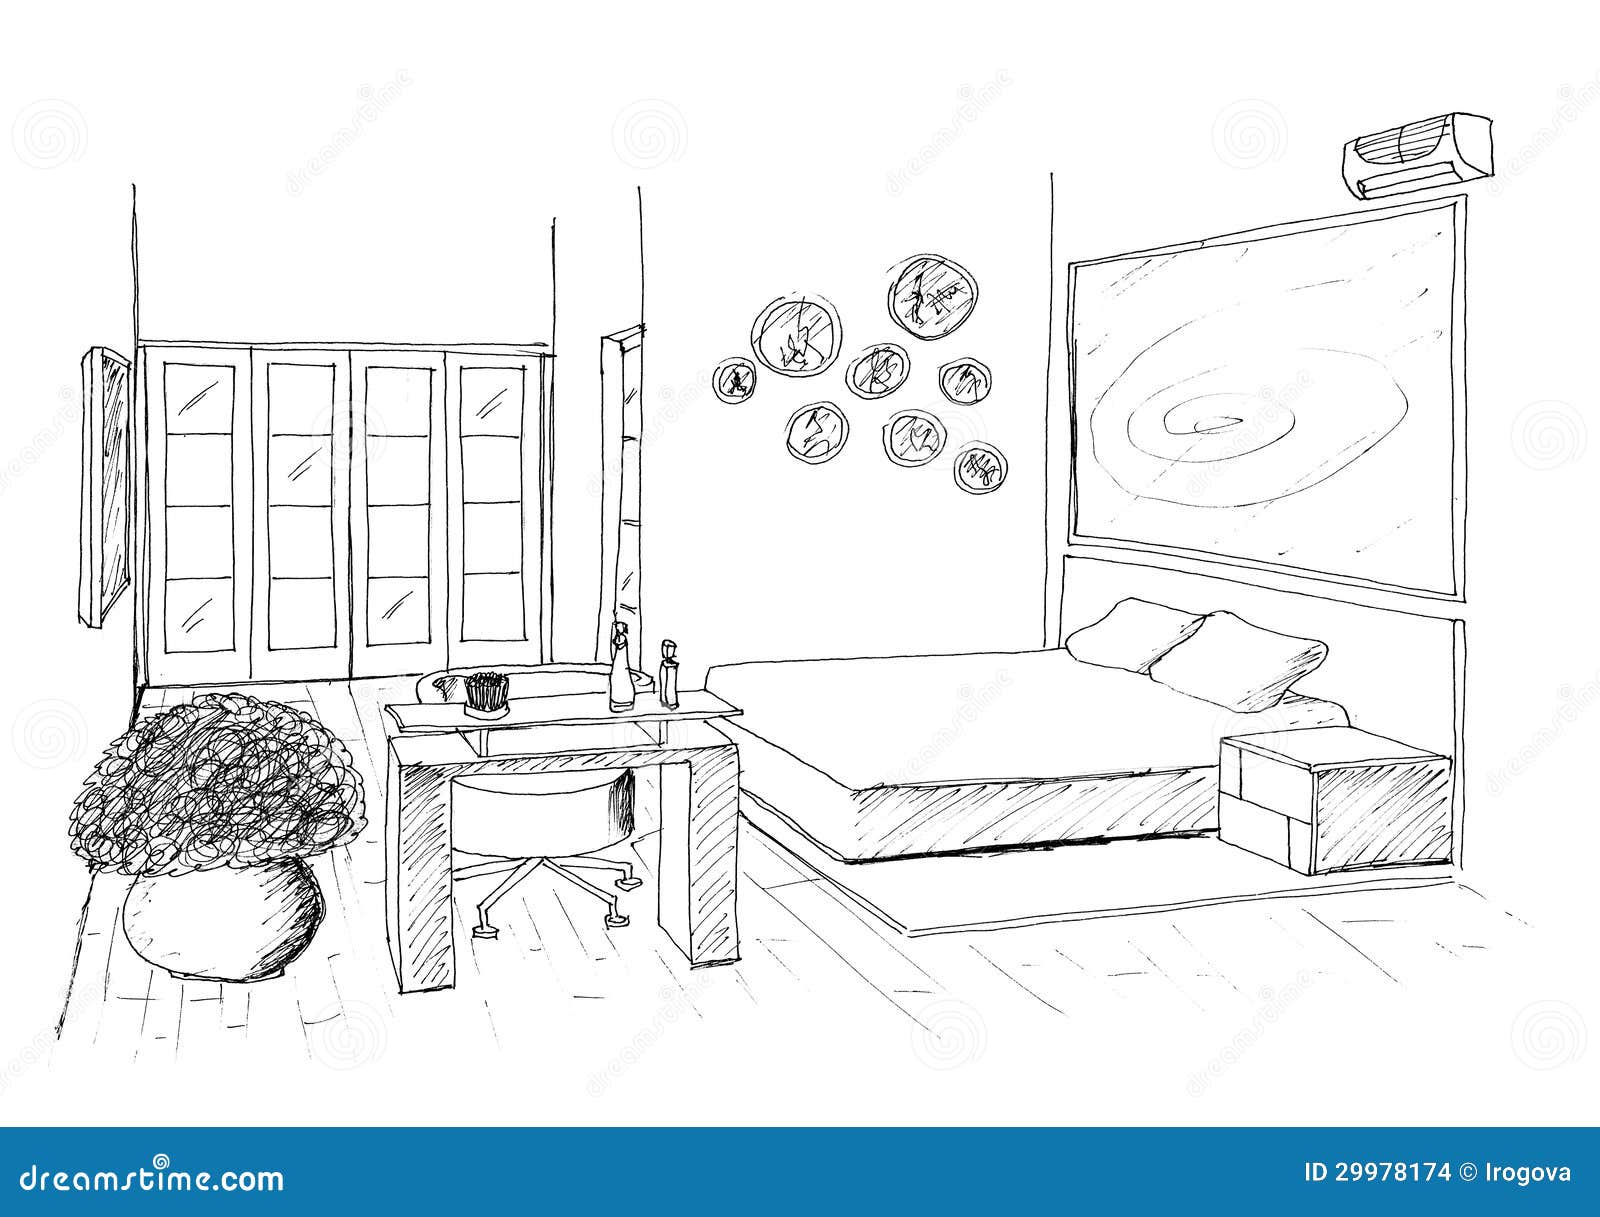 Graphic sketch an bedroom stock illustration. Illustration of cozy